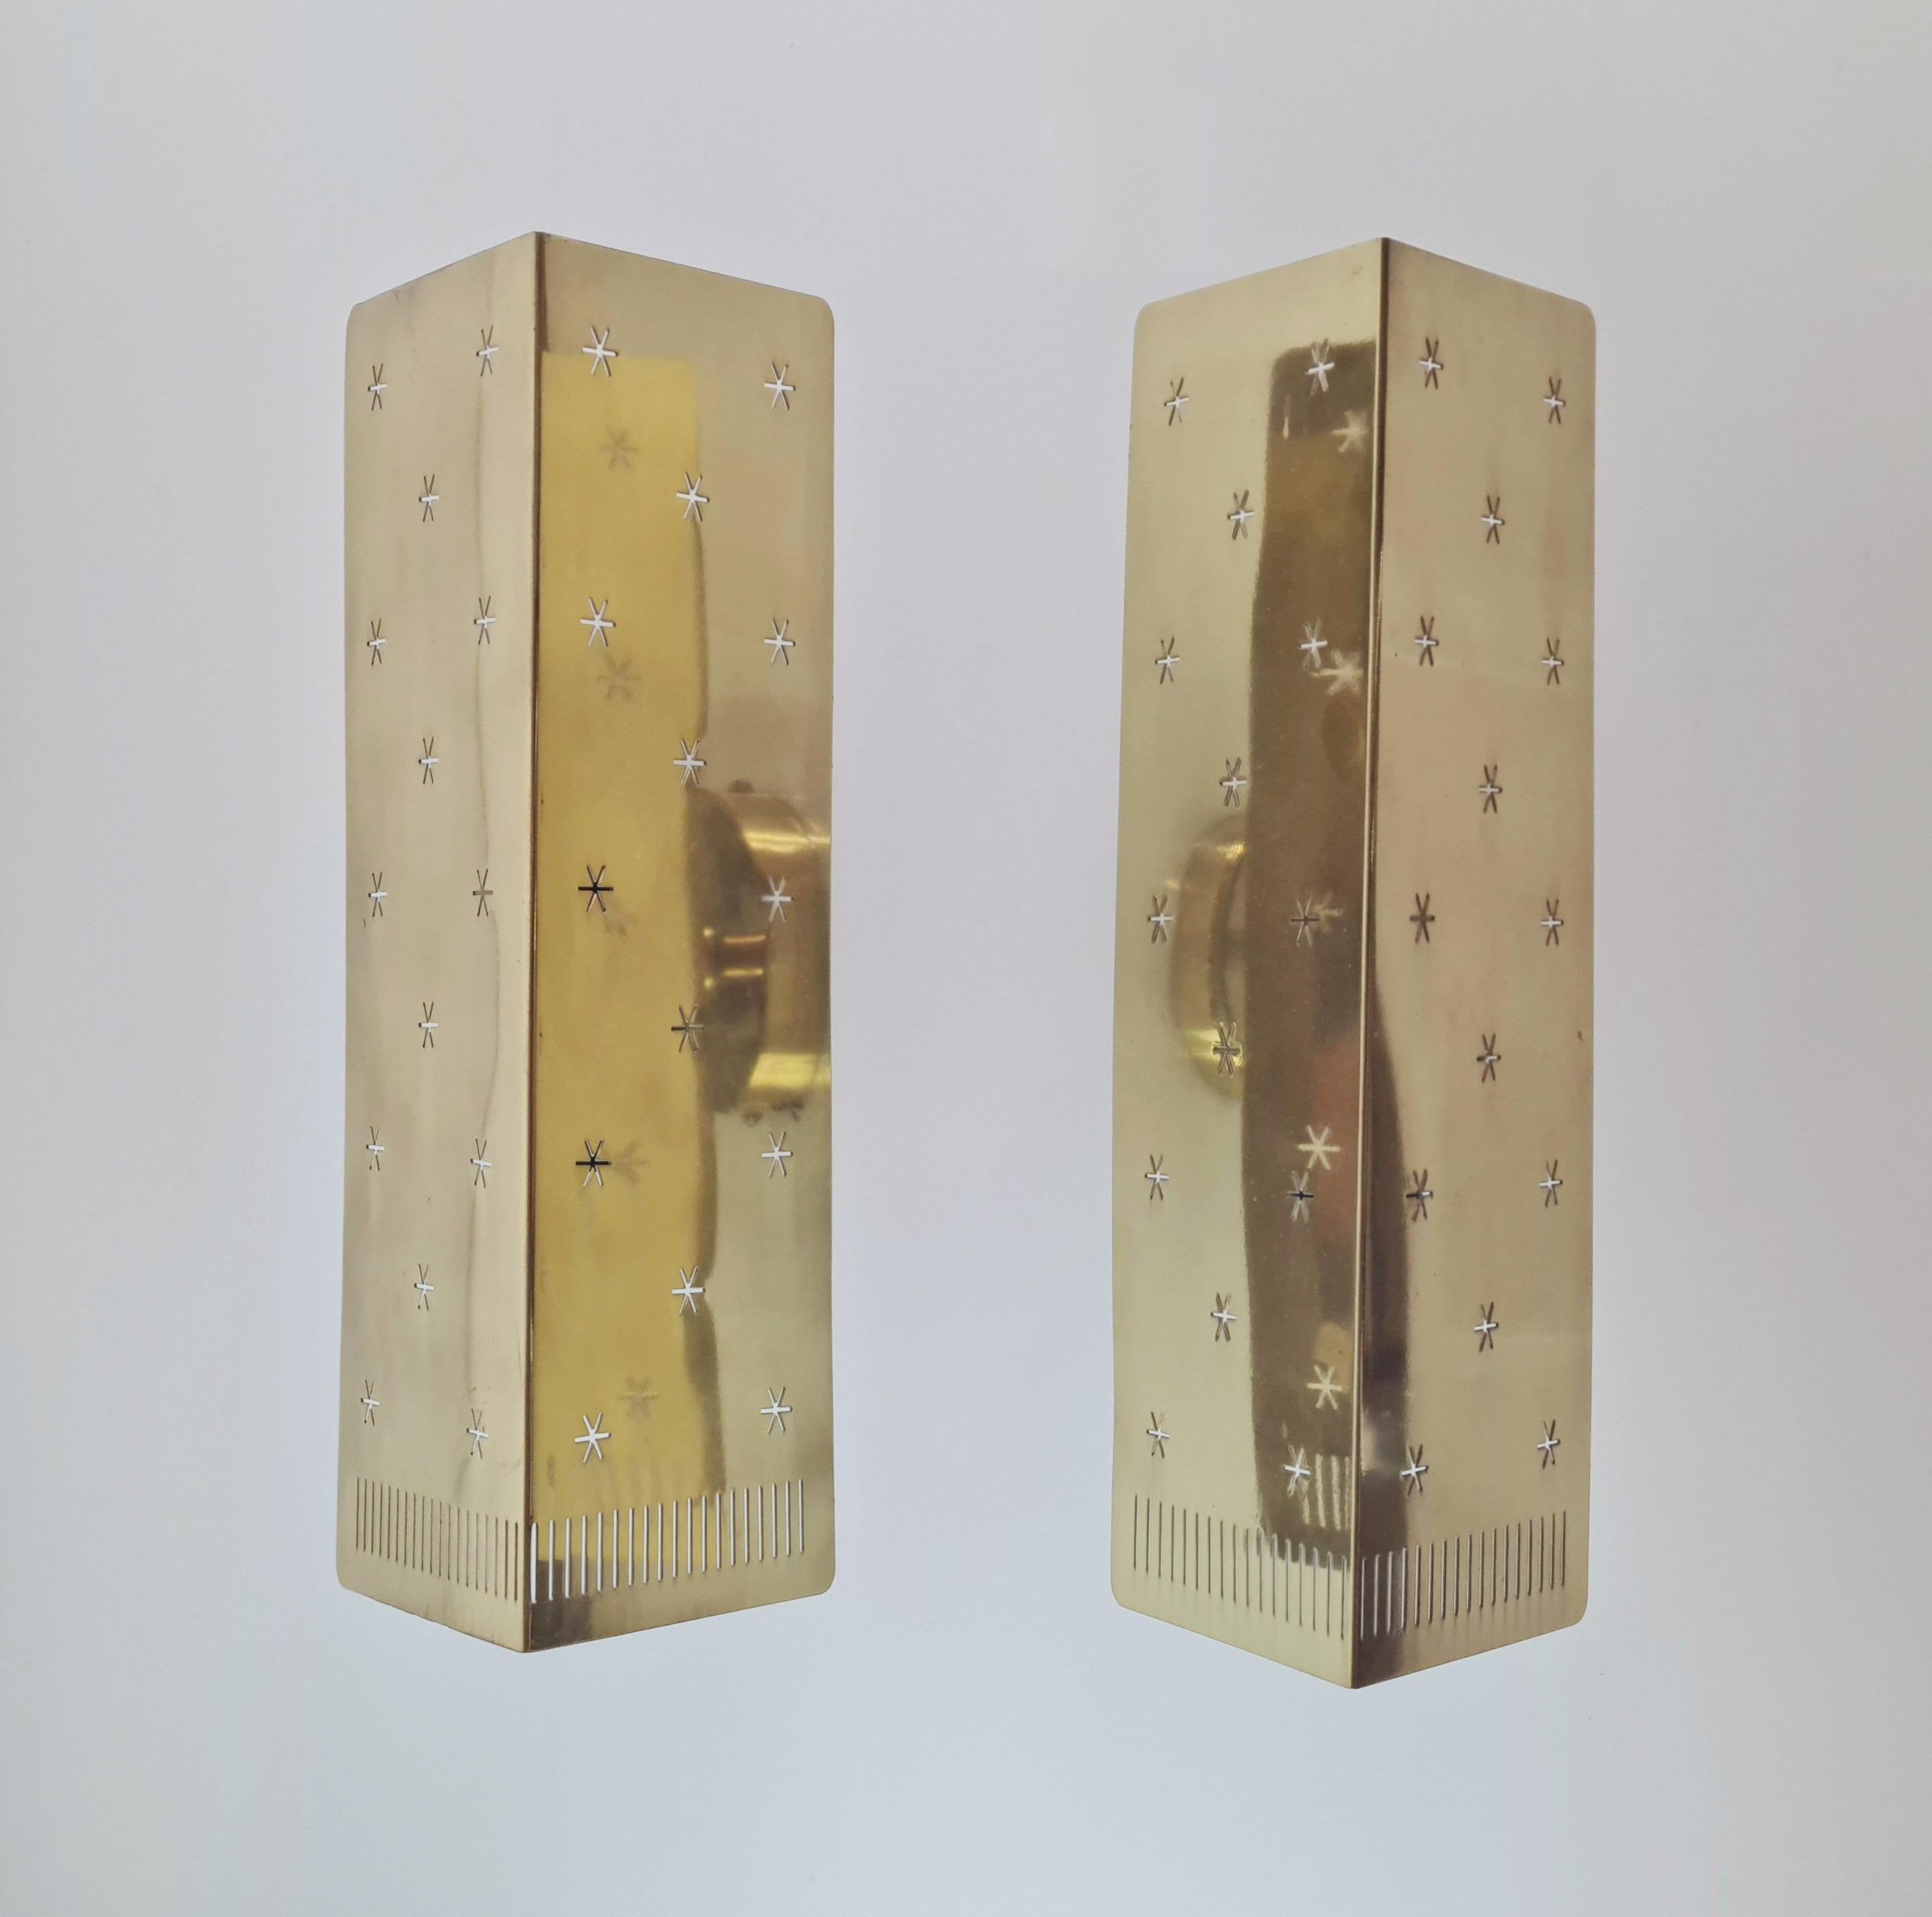 Paavo Tynell, Pair of Wall Sconce, Model 10330 aka stars and stripes, Taito Oy 2